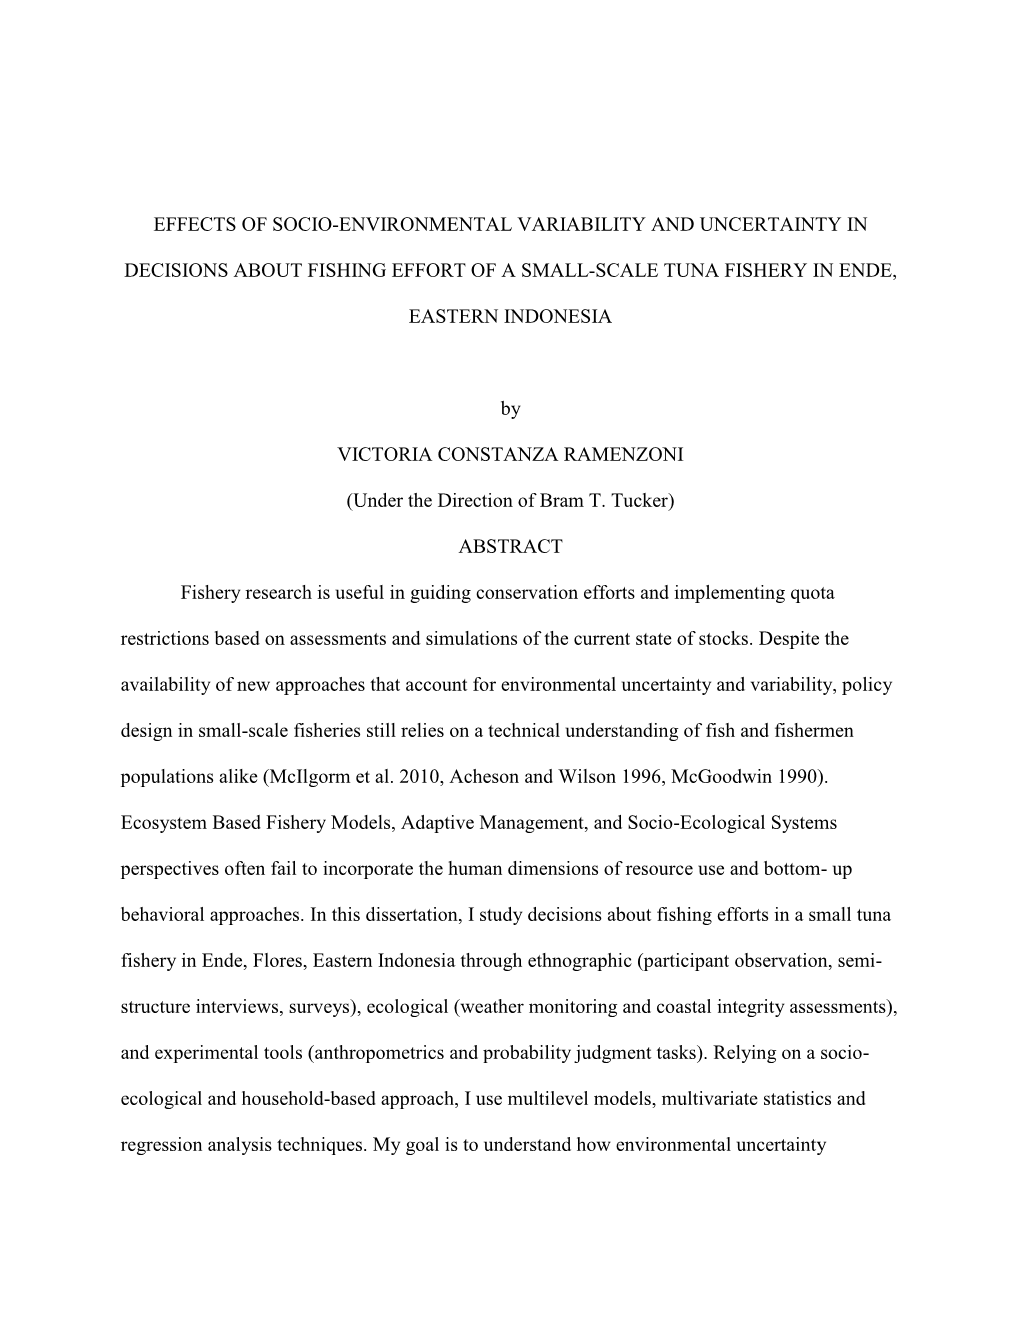 Effects of Socio-Environmental Variability and Uncertainty In